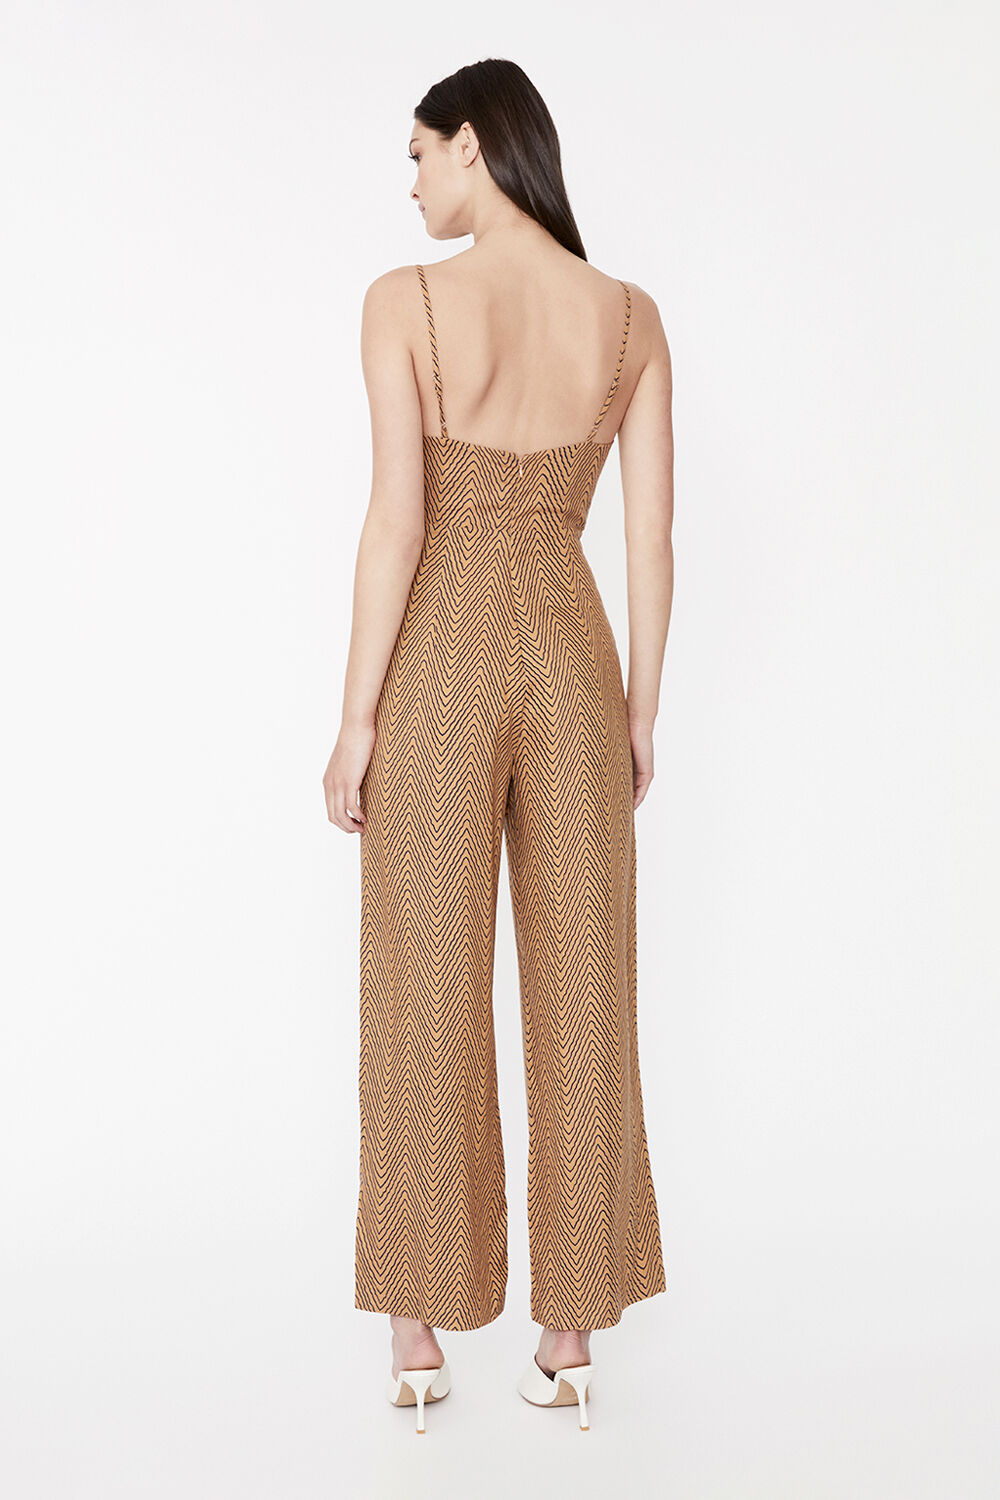 CODA ABSTRACT JUMPSUIT in colour SKYWAY